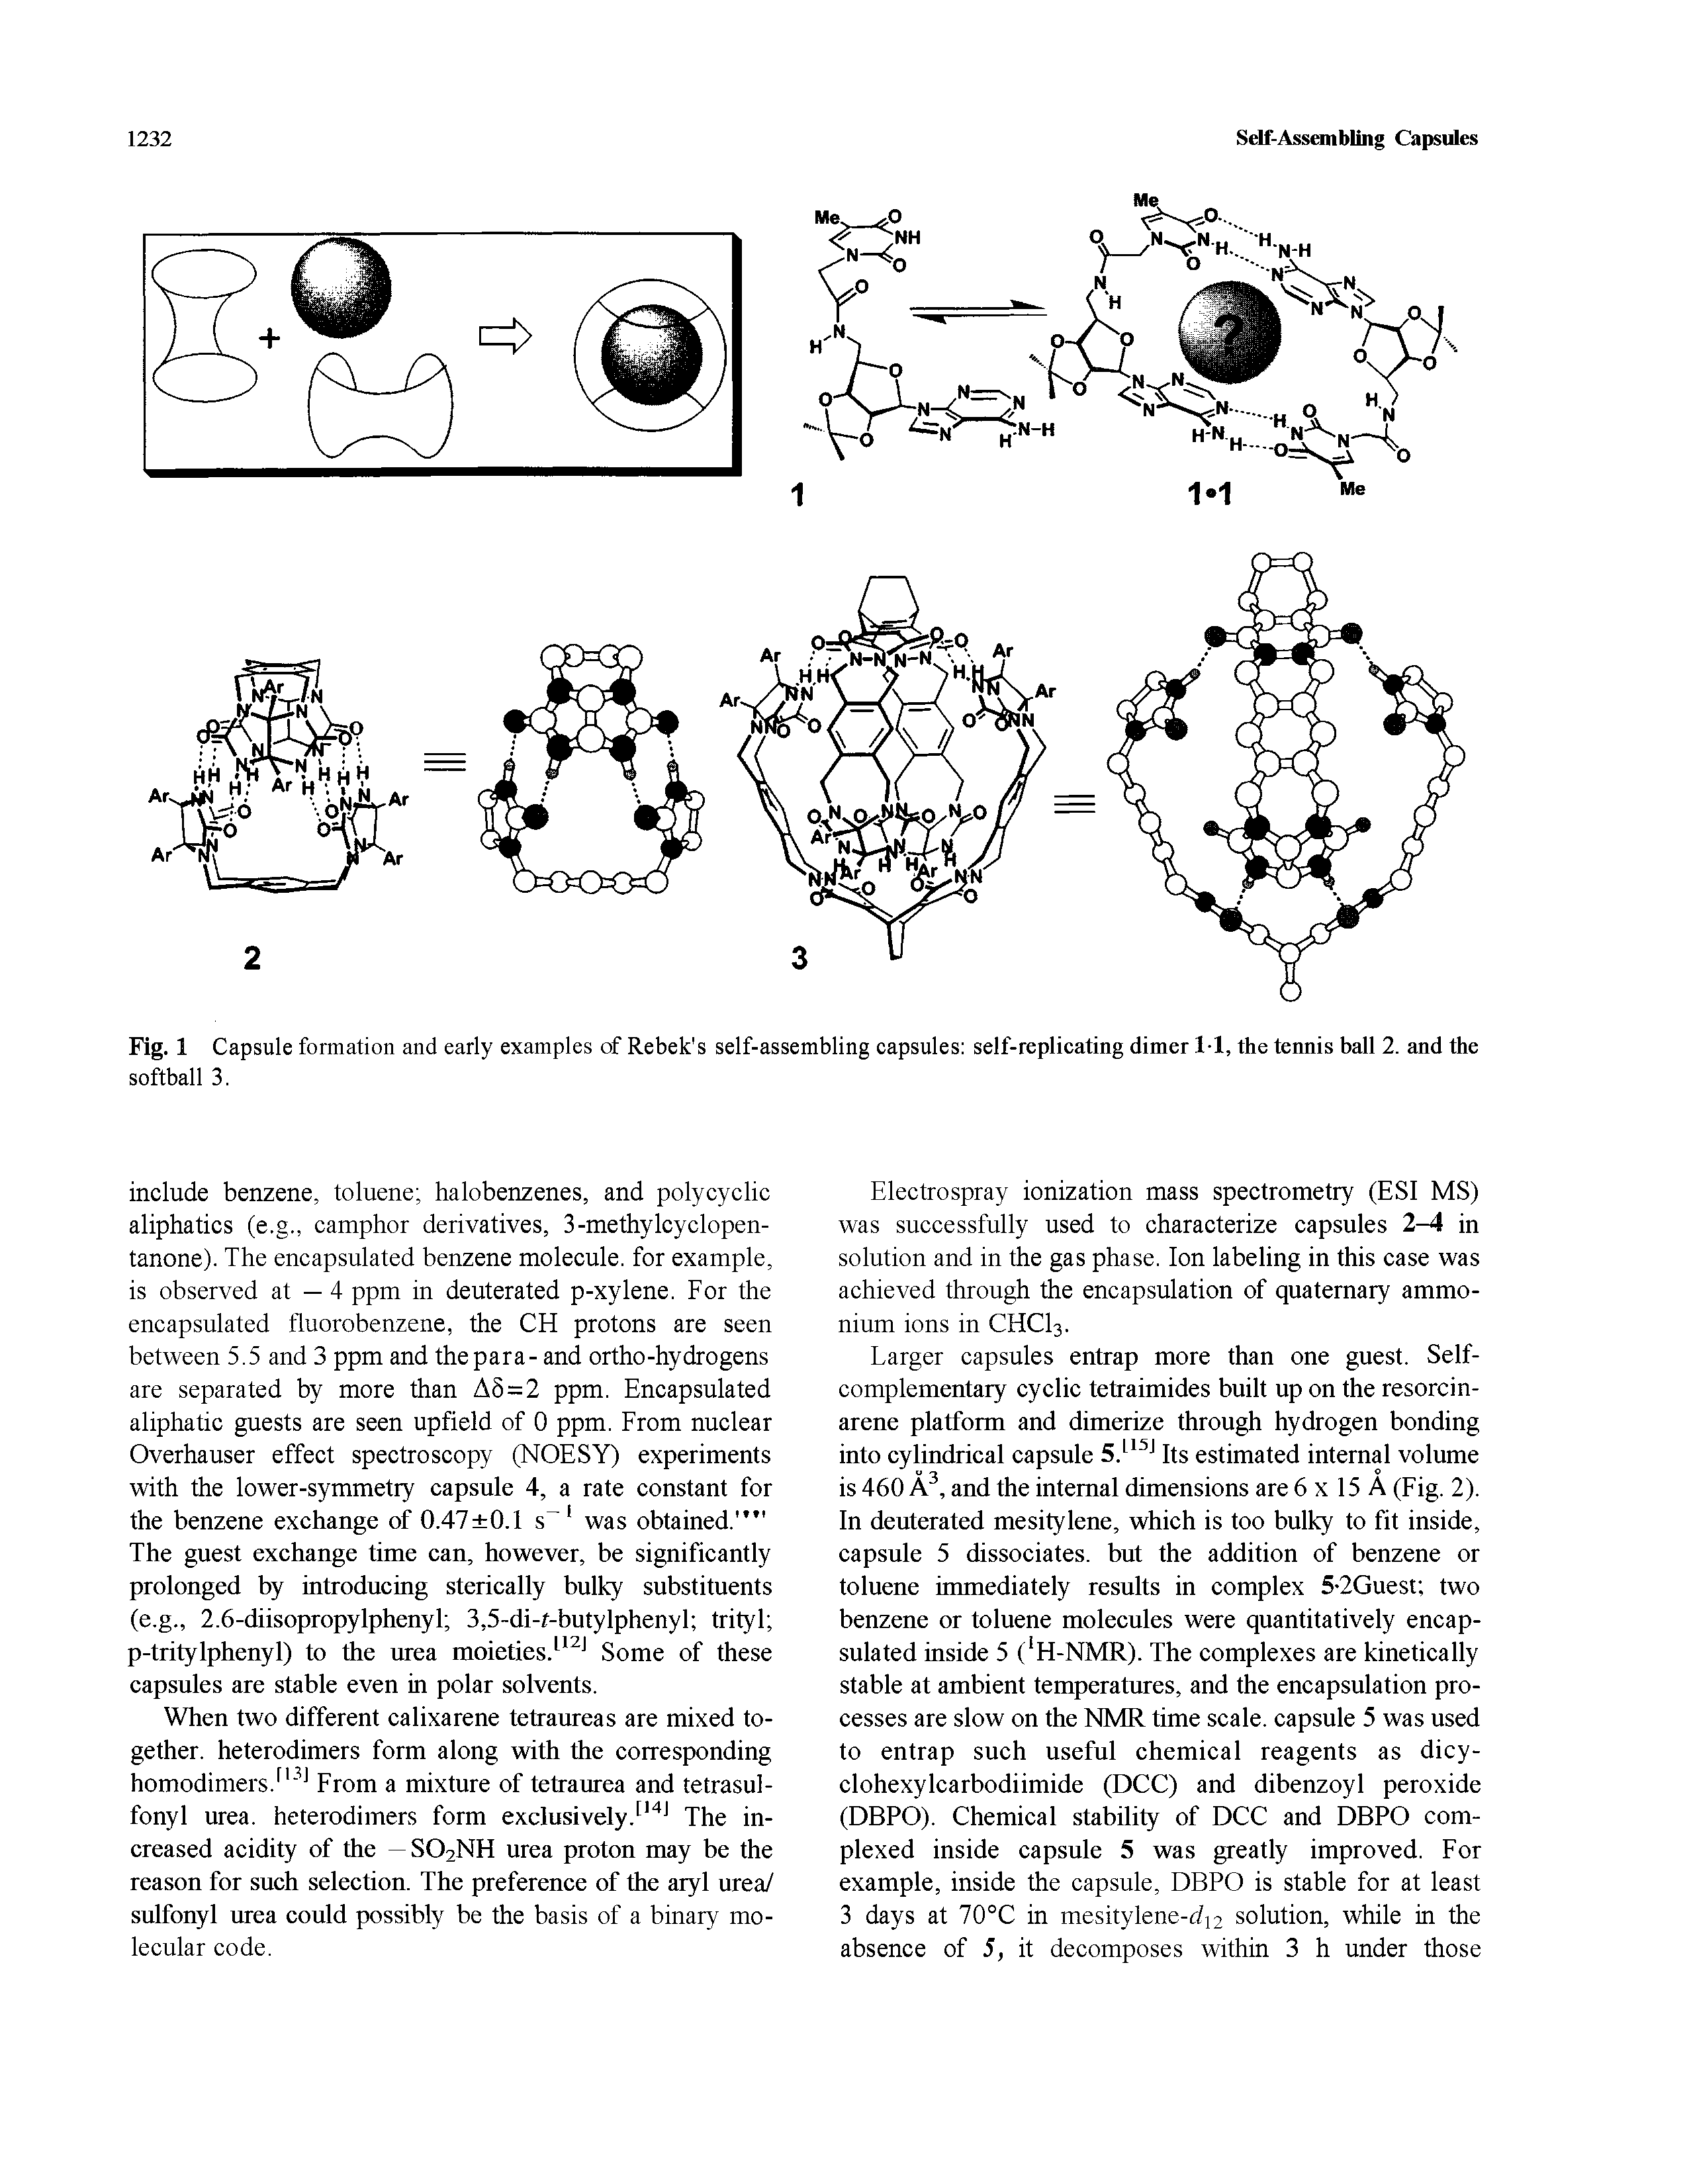 Fig. 1 Capsule formation and early examples of Rebek s self-assembling eapsules self-replicating dimer 1-1, the tennis ball 2. and the softball 3.